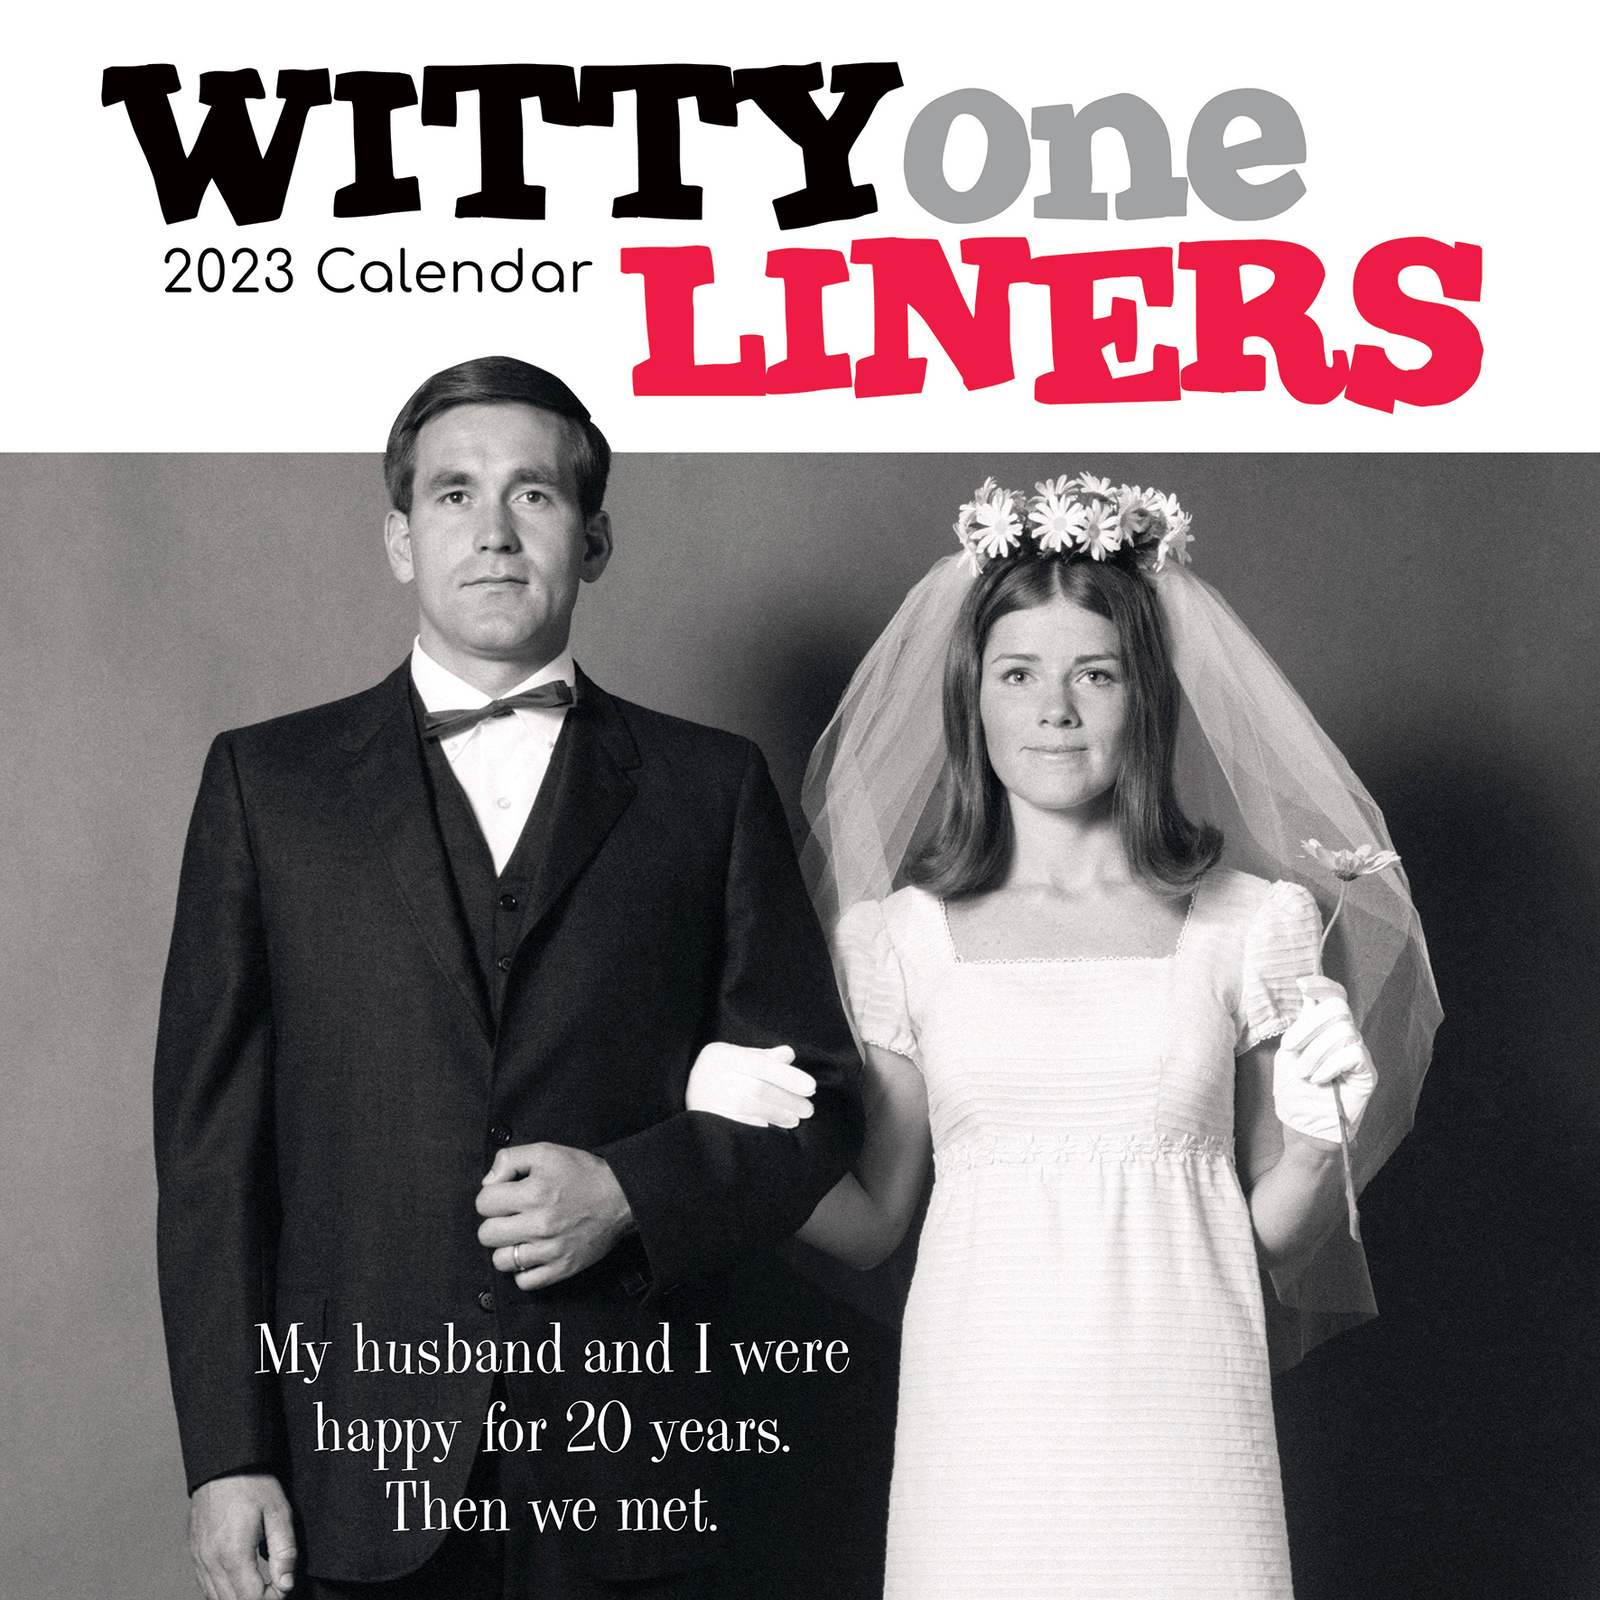 2023 Calendar Witty One Liners Square Wall by The Gifted Stationery